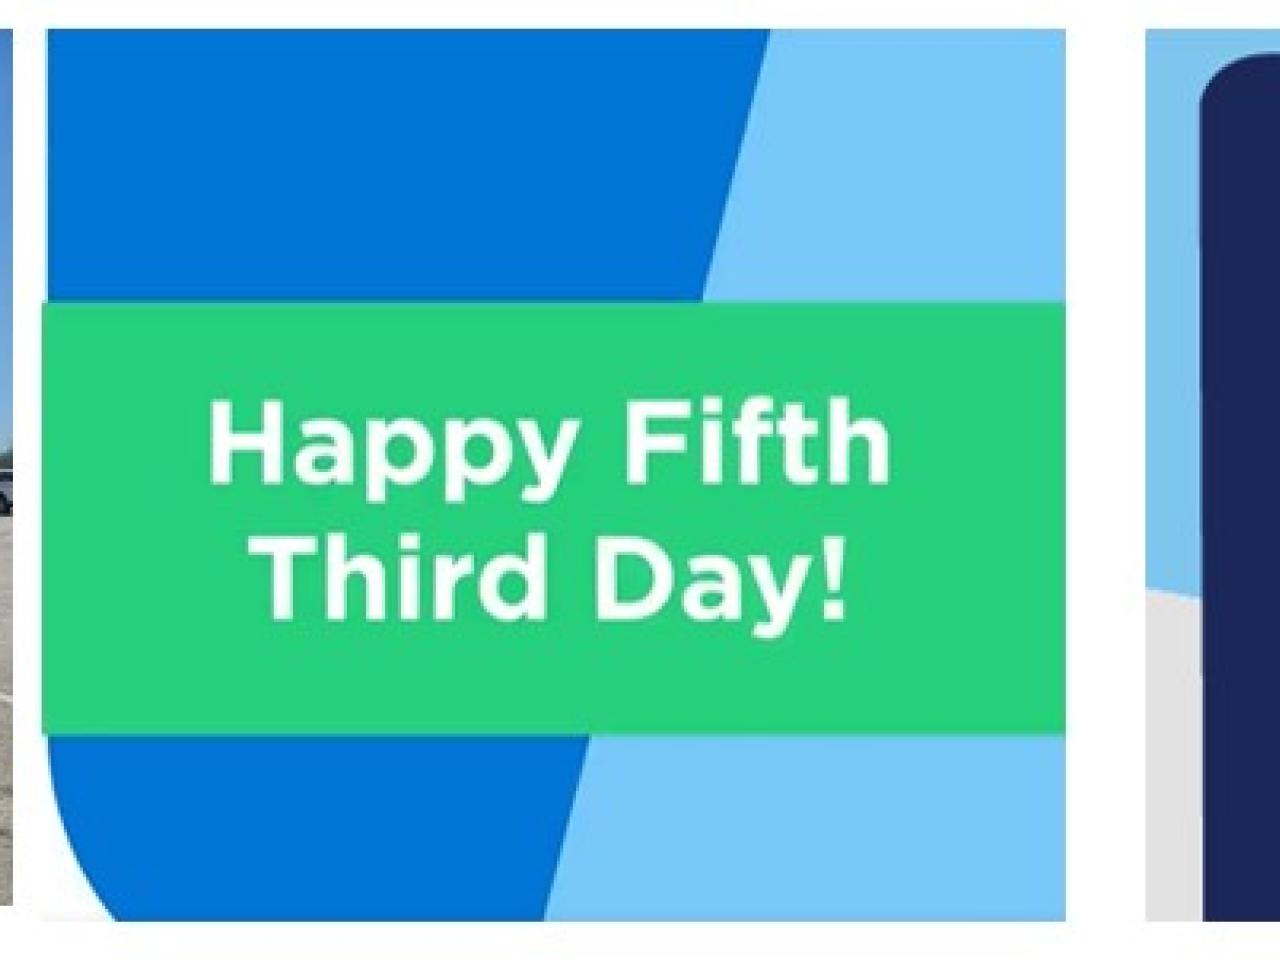 Happy Fifth Third Day! 